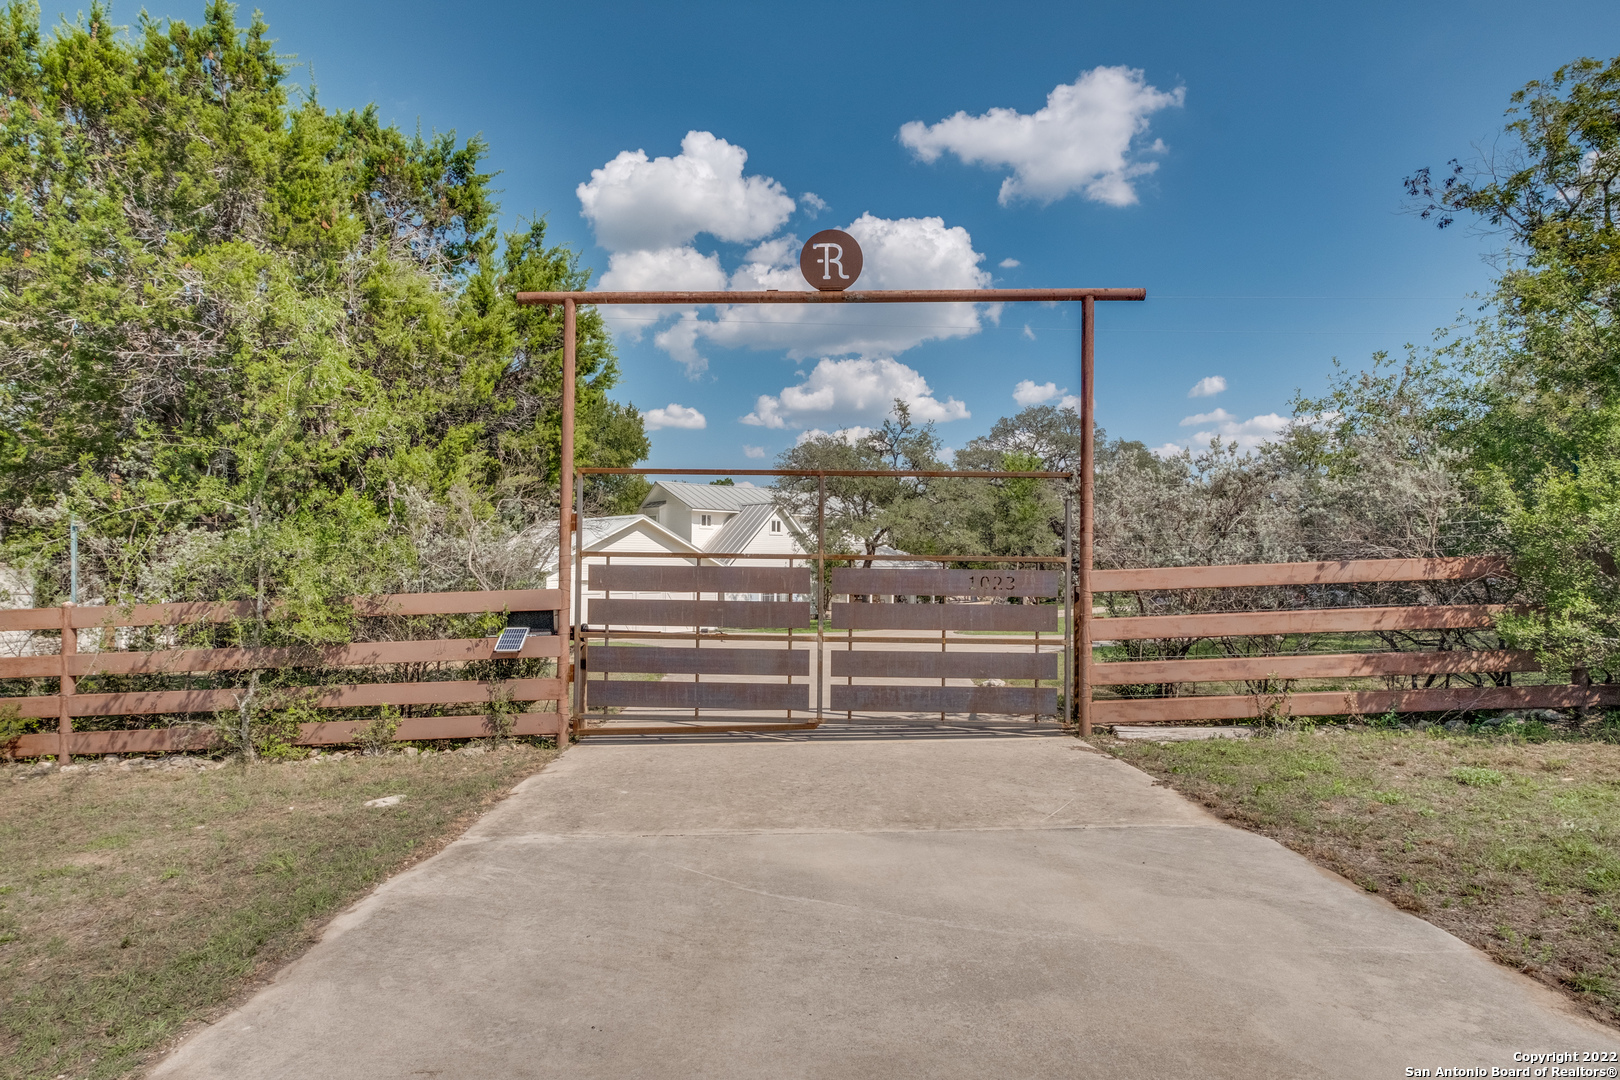 A Wow Horse Farm located 15 minutes to Boerne and just across the River from Sisterdale...several wineries are in the area(and about 30 minutes to Fredericksburg!)  Beautiful long range view to the pastures and beyond; Large 8 Stall Horse Barn (approx. 26' x 70') w/Quarters (Full Bath, Kitchen & Bedroom):  This is the type of Barn that is welcoming to spend time in...it is situated to catch the breezes and offers wide breezeways and covered area for equipment storage or gathering. Owner has hosted gatherings in the barn and outside spaces.  Property features multiple pastures, is completely fenced and offers excellent Coastal Hay production (60 to 70 Round Bales according to owner) plus a beautiful Hill Country backdrop.   Home is charming w/a flexible floorplan (2 Bedrooms w/Ensuite Baths on Main Level); Loft, 2 Bedrooms, Alcove & Full Bath on 2nd level.  Beautiful Beams in Great Room Area which opens to the Dining Area;   Kitchen is neutral and offers abundant counters; Full Length Screened Porch over looks rocked patio area w/Chimenea-style fireplace.  Raised Bed Gardens are located on the side of the home w/piped water proximity.  Detached 2 car garage and Well w/Storage Tank round out this special property.